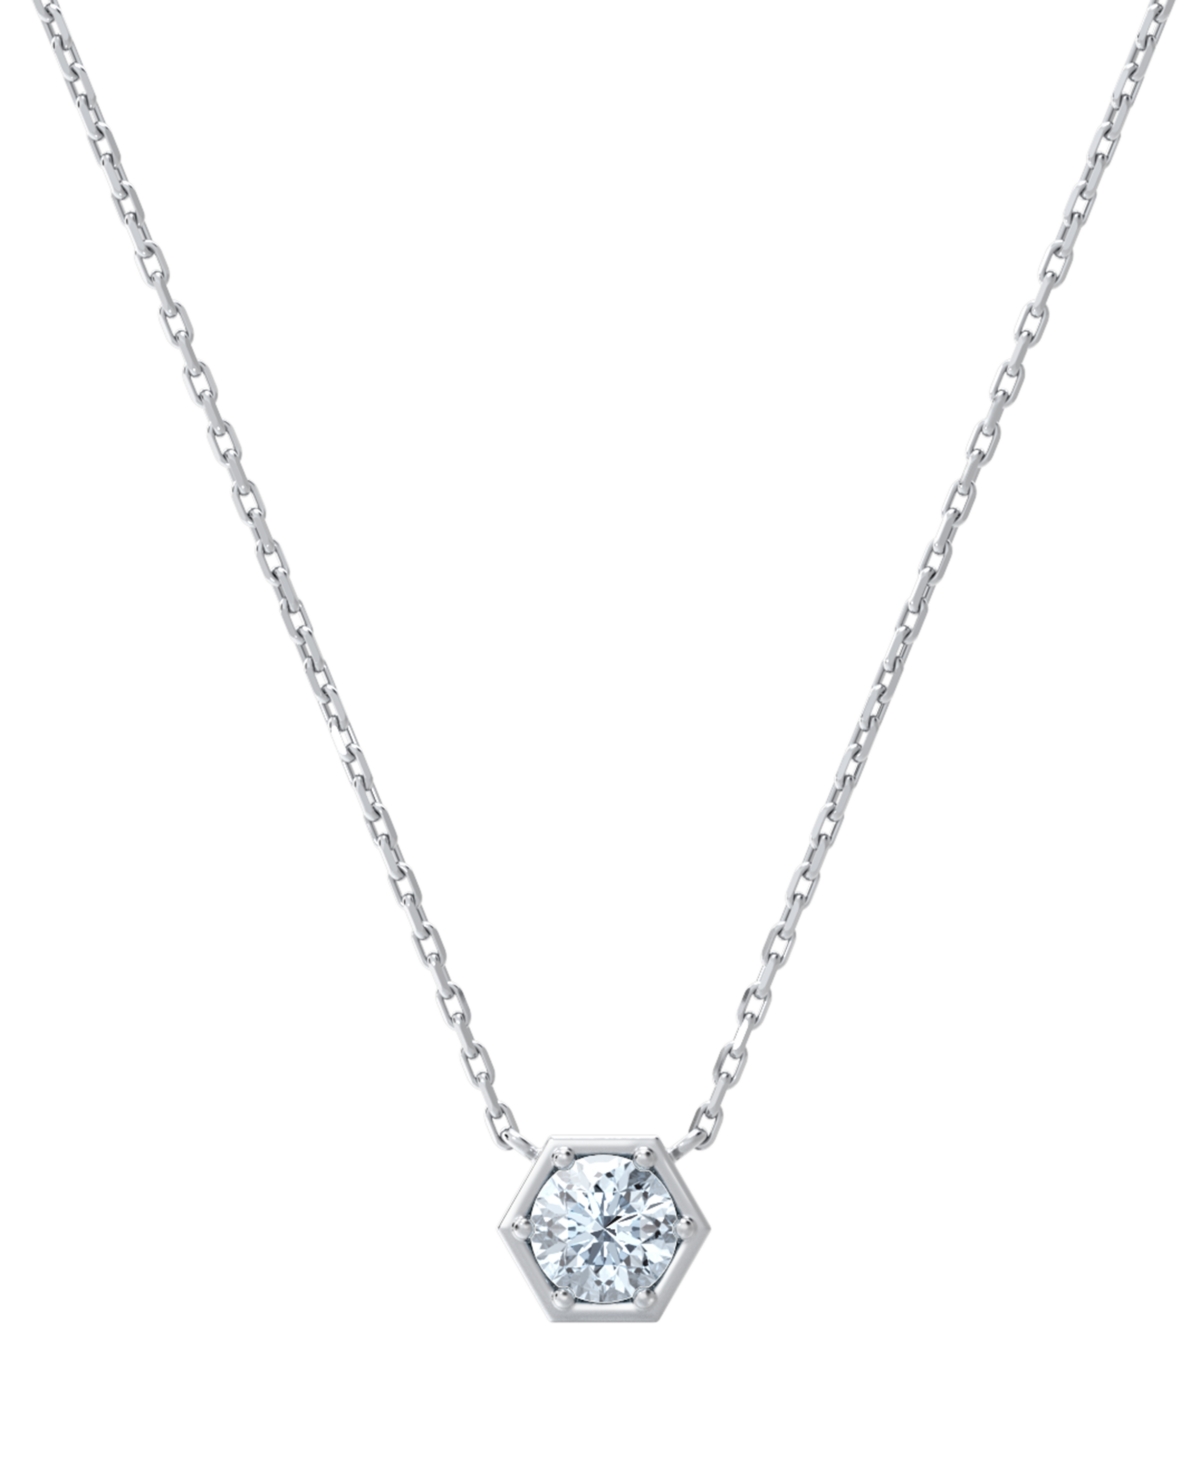 Portfolio by De Beers Forevermark Diamond Honeycomb Solitaire Pendant Necklace (1/4 ct. t.w.) in 14k White or Yellow Gold, 16" + 2" extender - White G